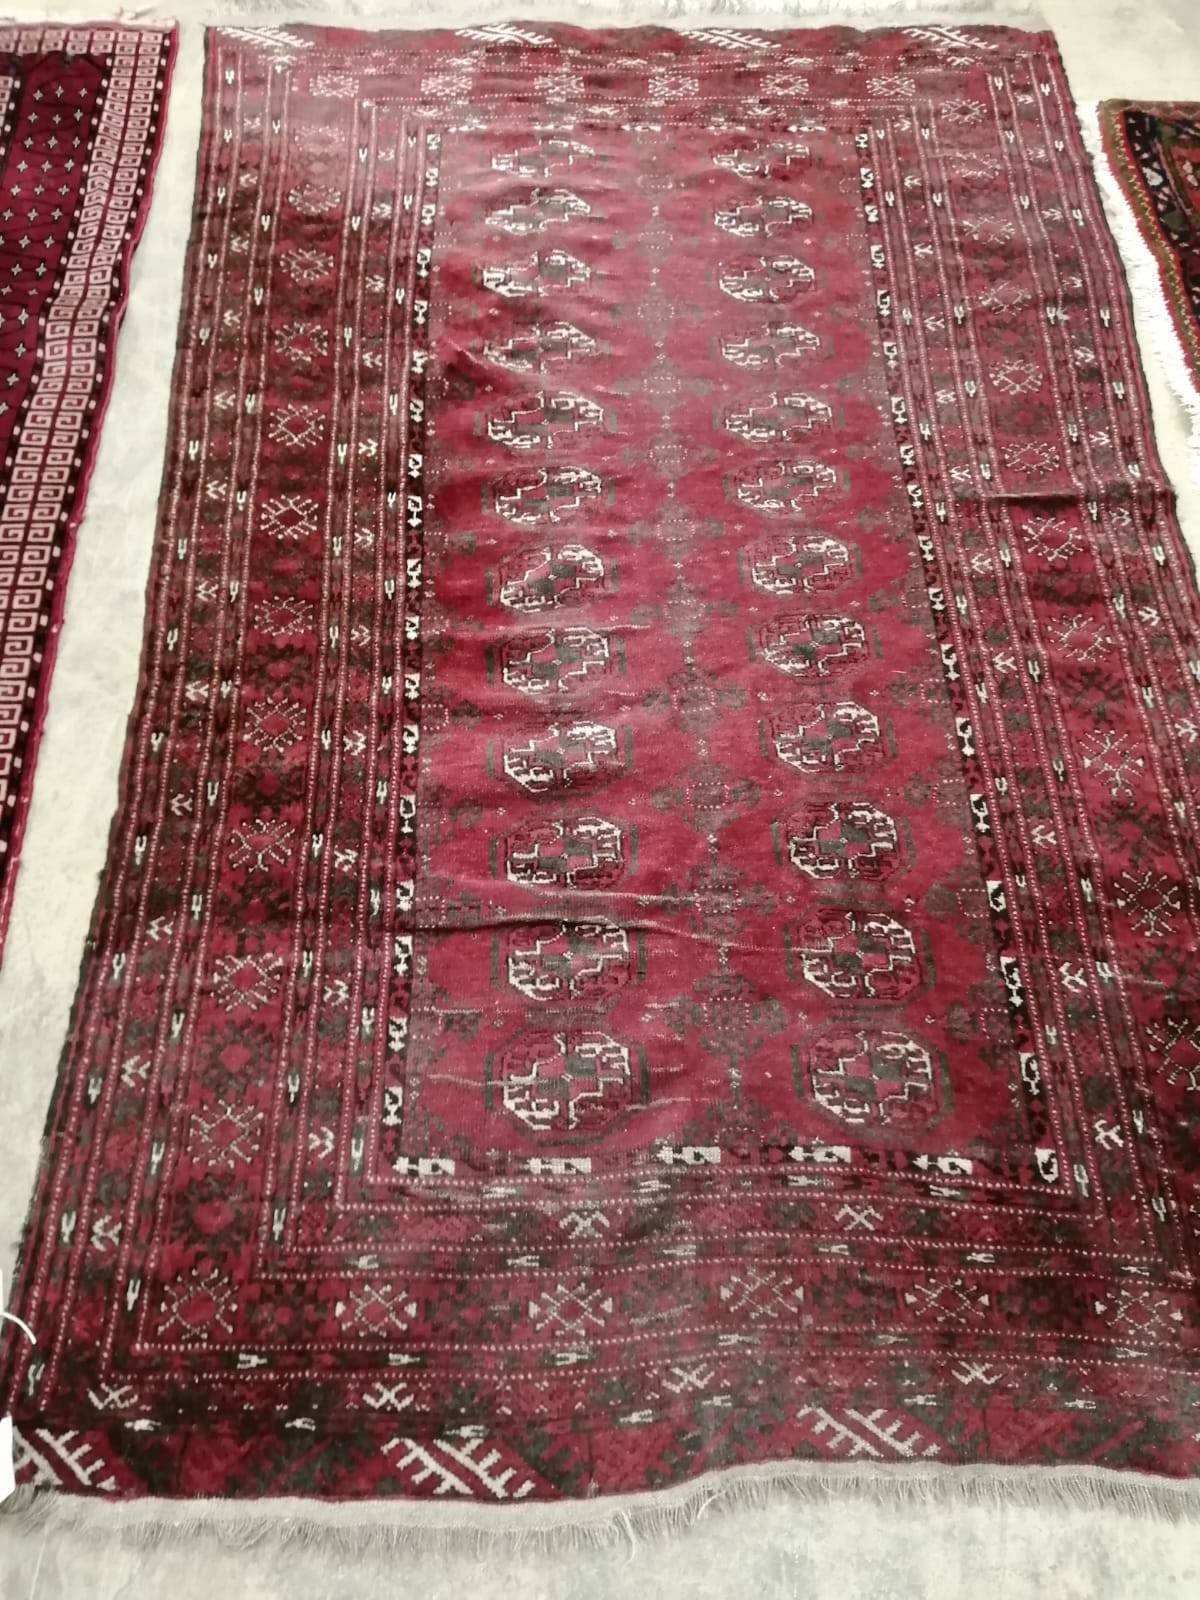 Two Bokhara / Belouch red ground rugs, larger 190 x 120cm